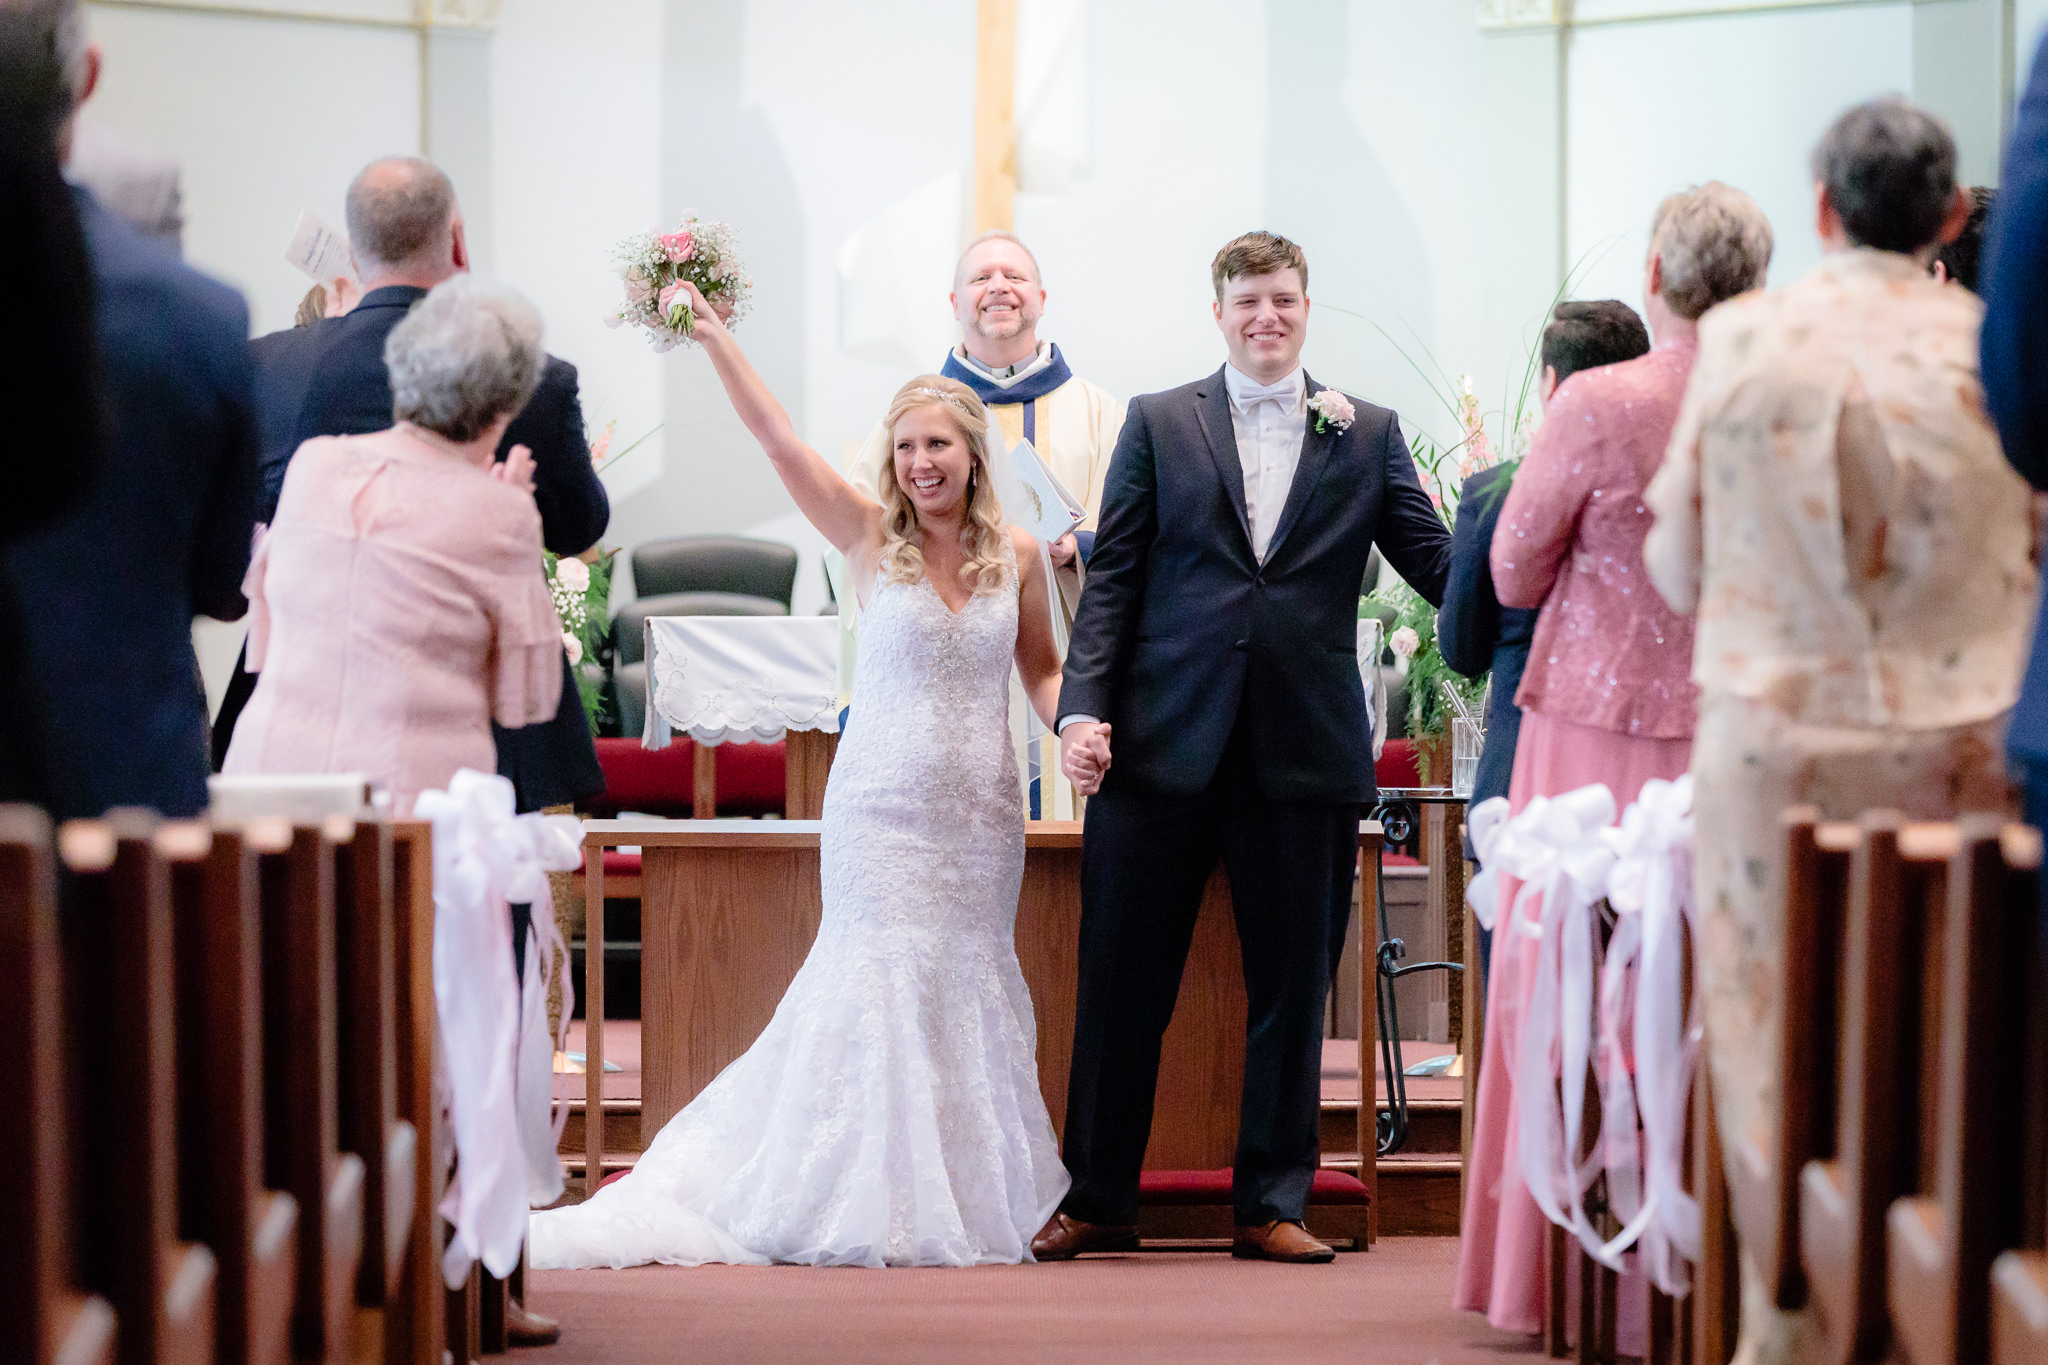 Newlyweds cheer after being married in the Duquesne University Chapel of the Holy Spirit